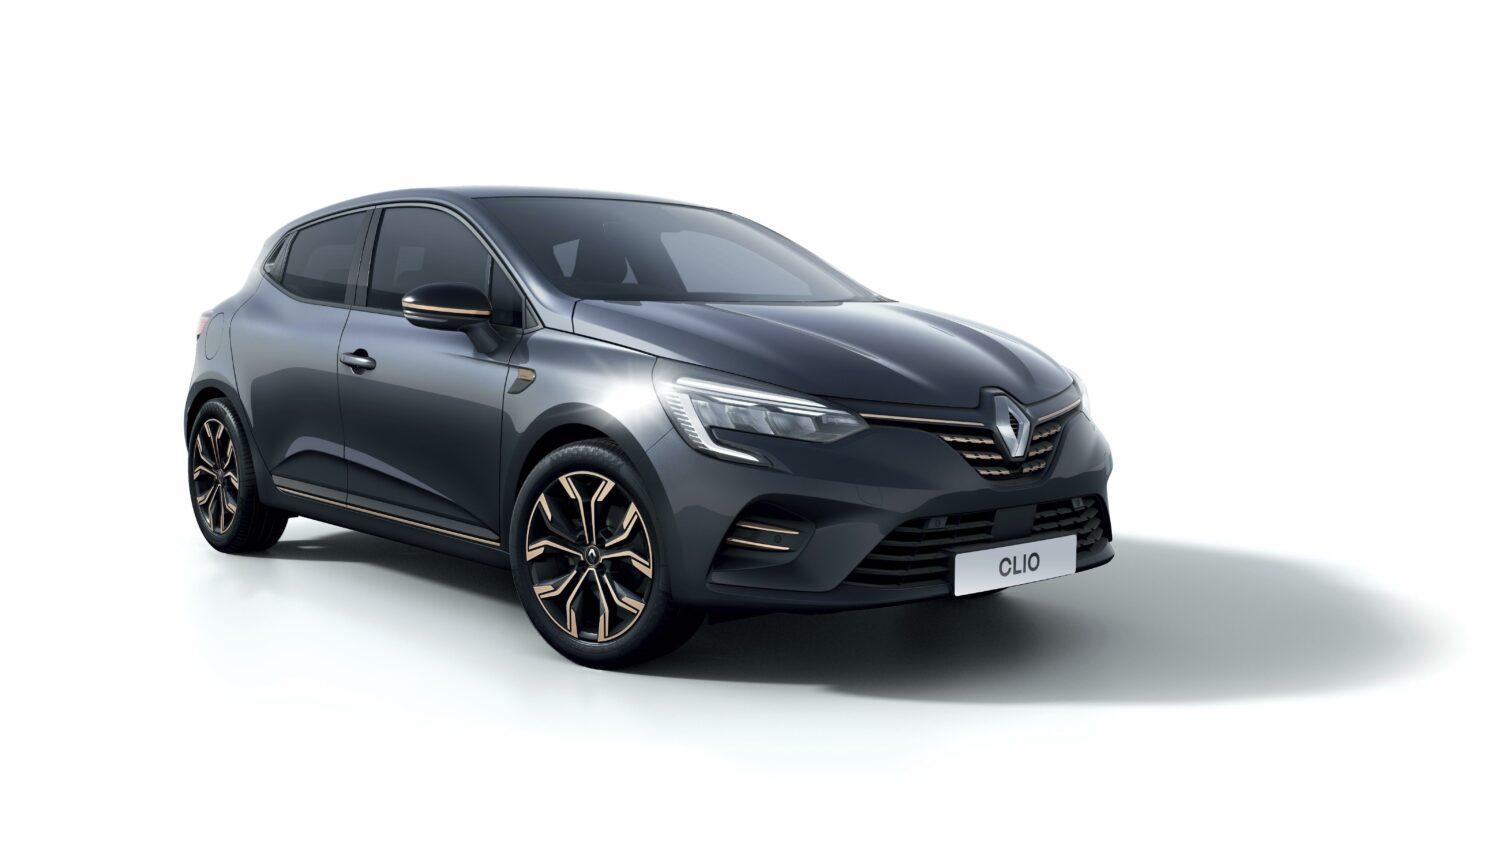 2021 - Renault Clio Lutecia Limited Series - Right-hand drive